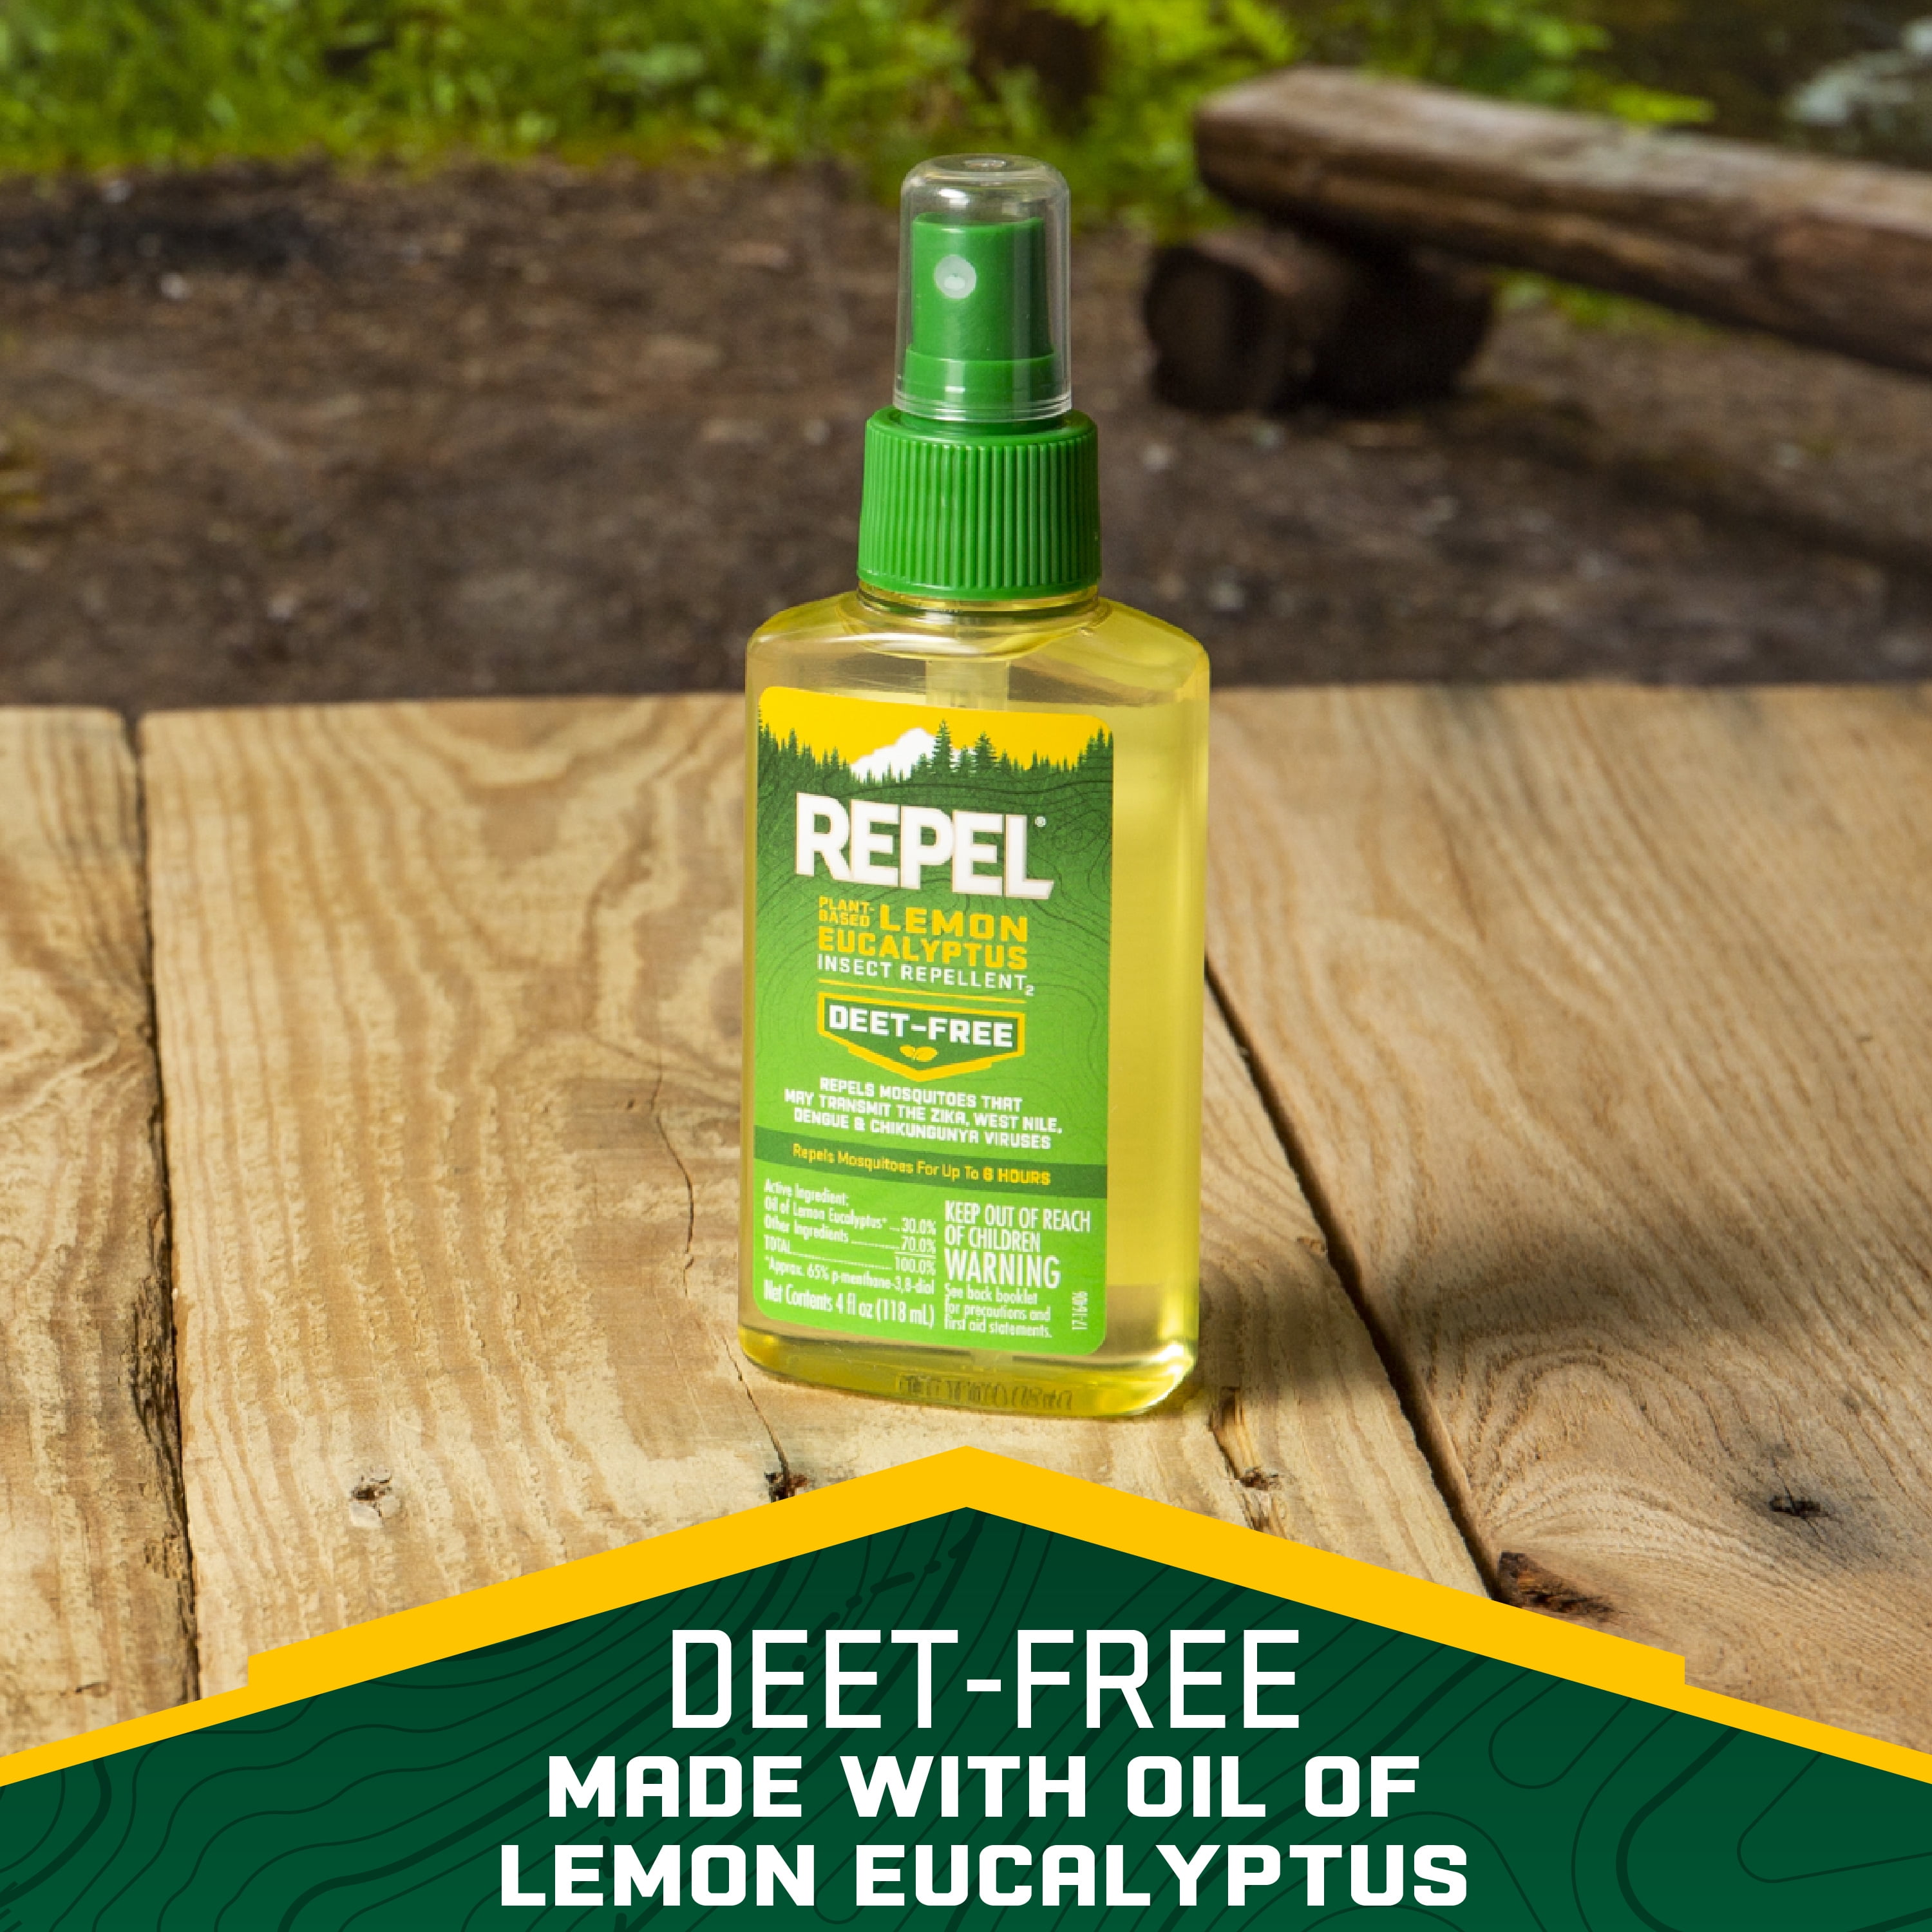 Repel Plant-Based Lemon Eucalyptus Insect Repellent 4 Ounces, Repels  Mosquitoes up to 6 Hours 